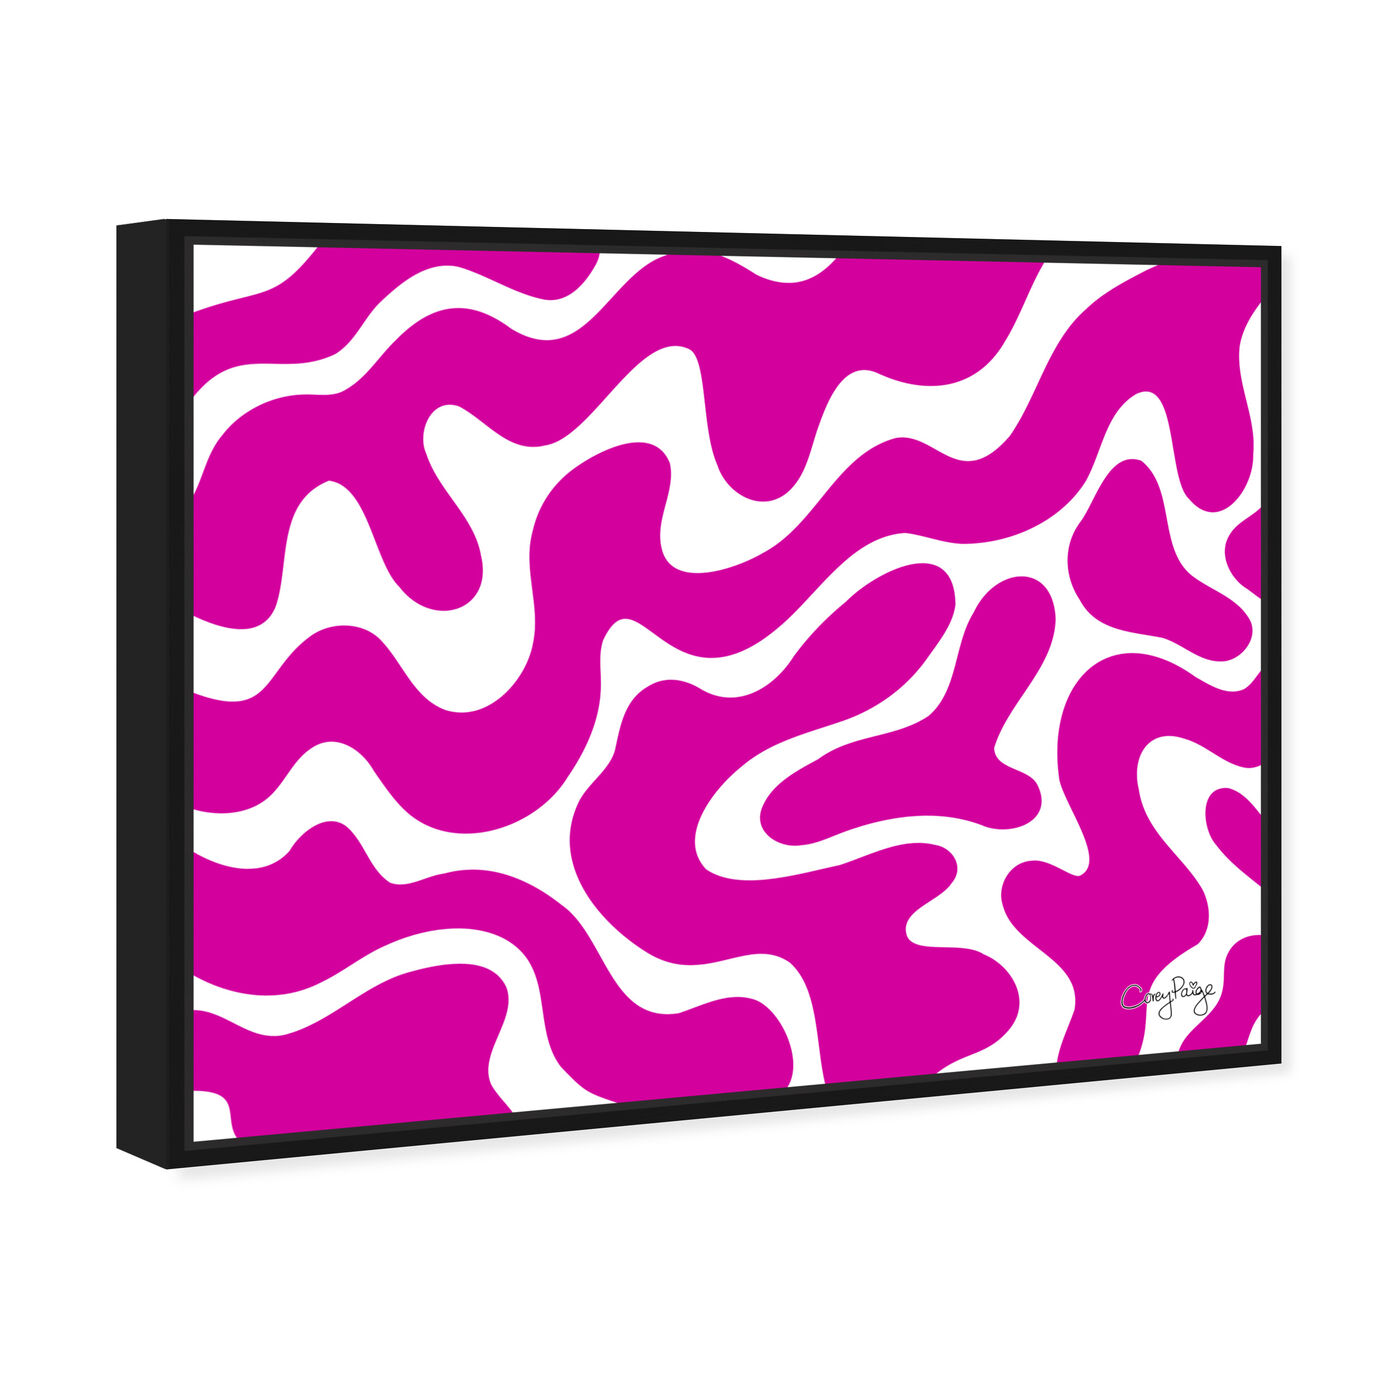 Angled view of Corey Paige - Pink Abstract II  featuring abstract and shapes art.